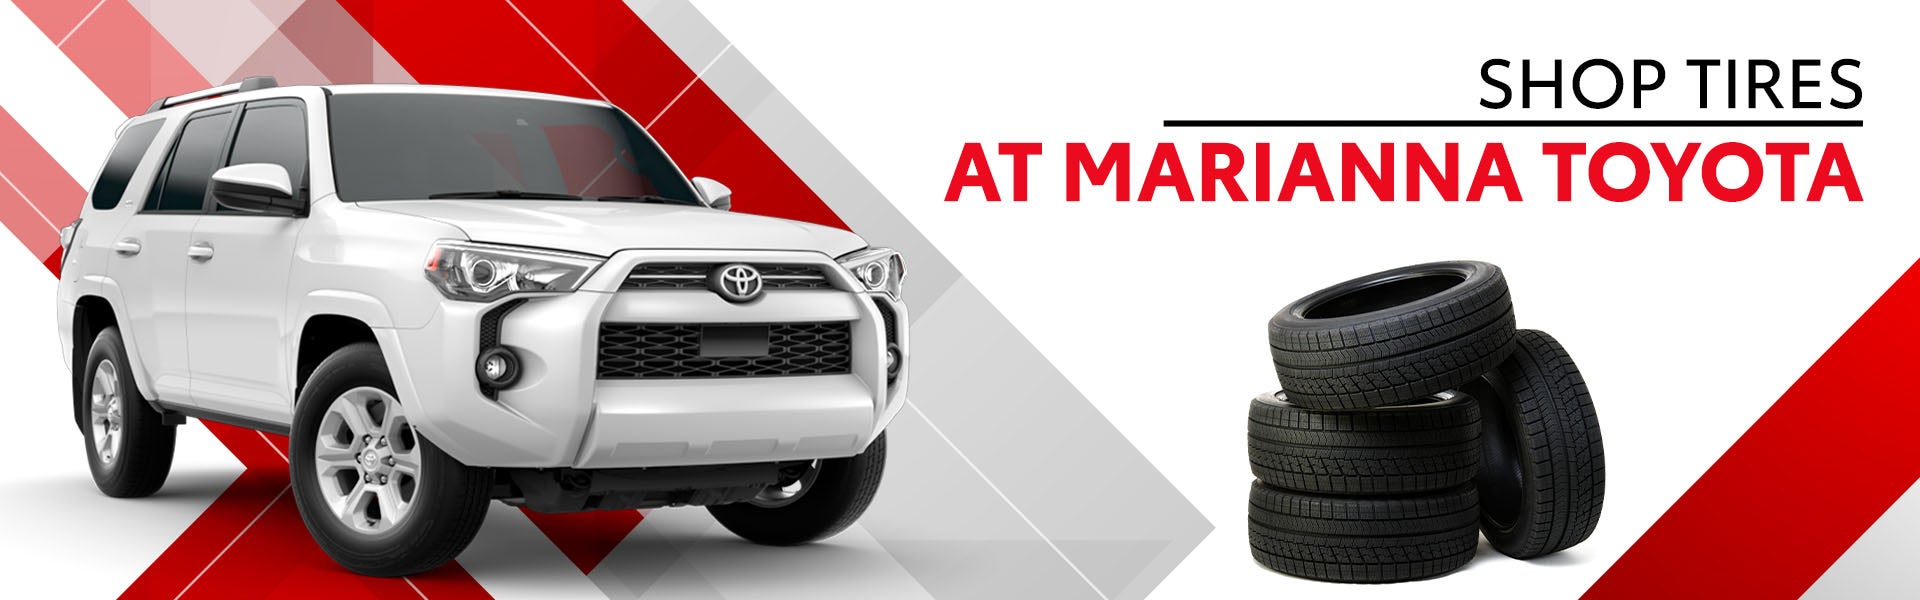 Shop Tires at Marianna Toyota